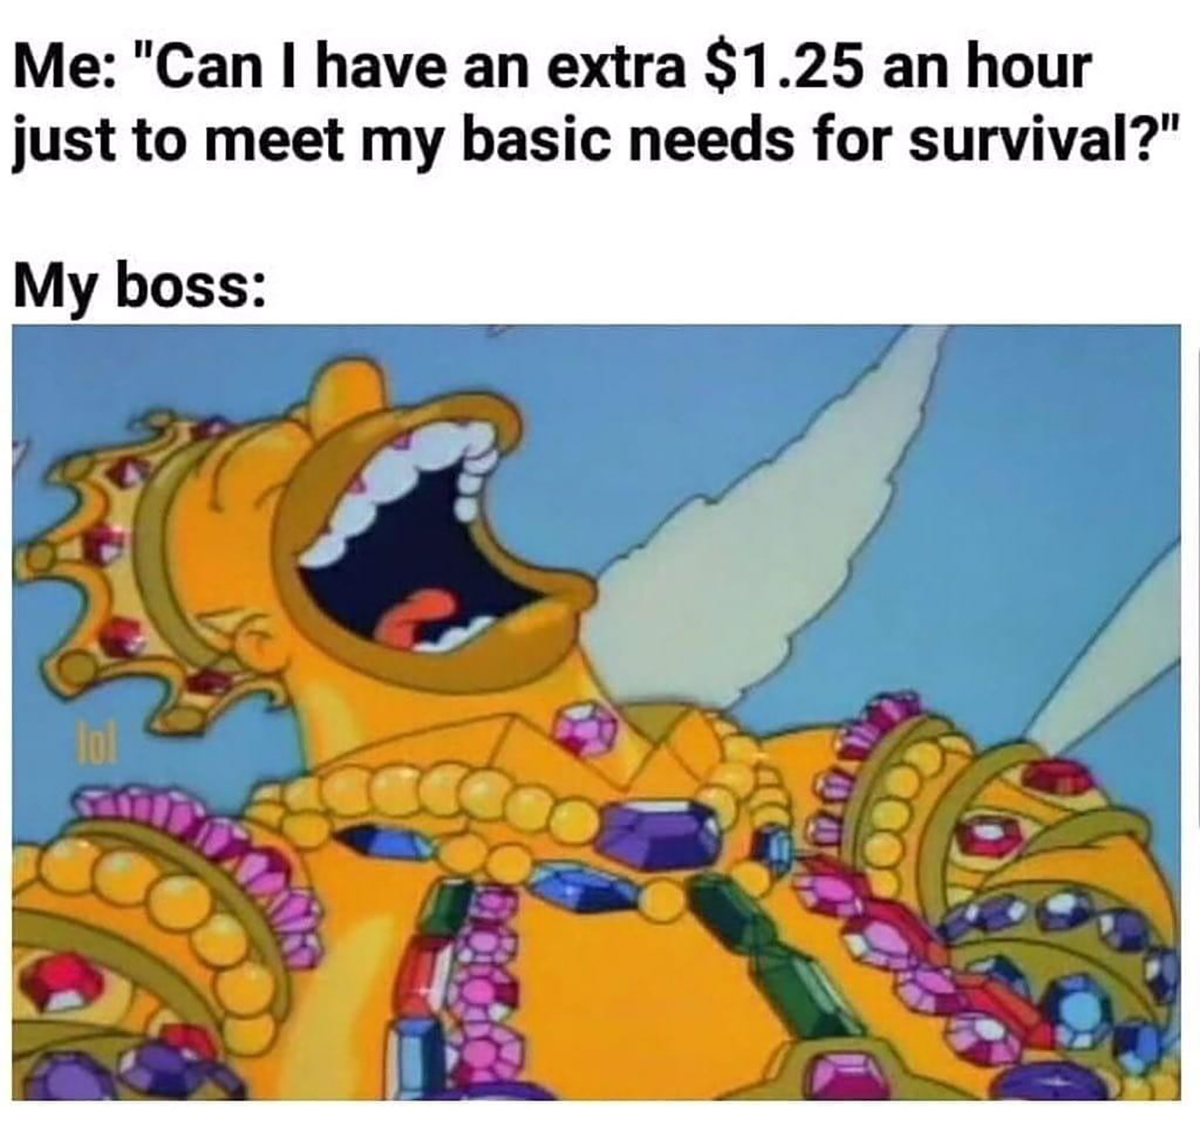 dank memes - gym owners in january meme - Me "Can I have an extra $1.25 an hour just to meet my basic needs for survival?" My boss lol wa